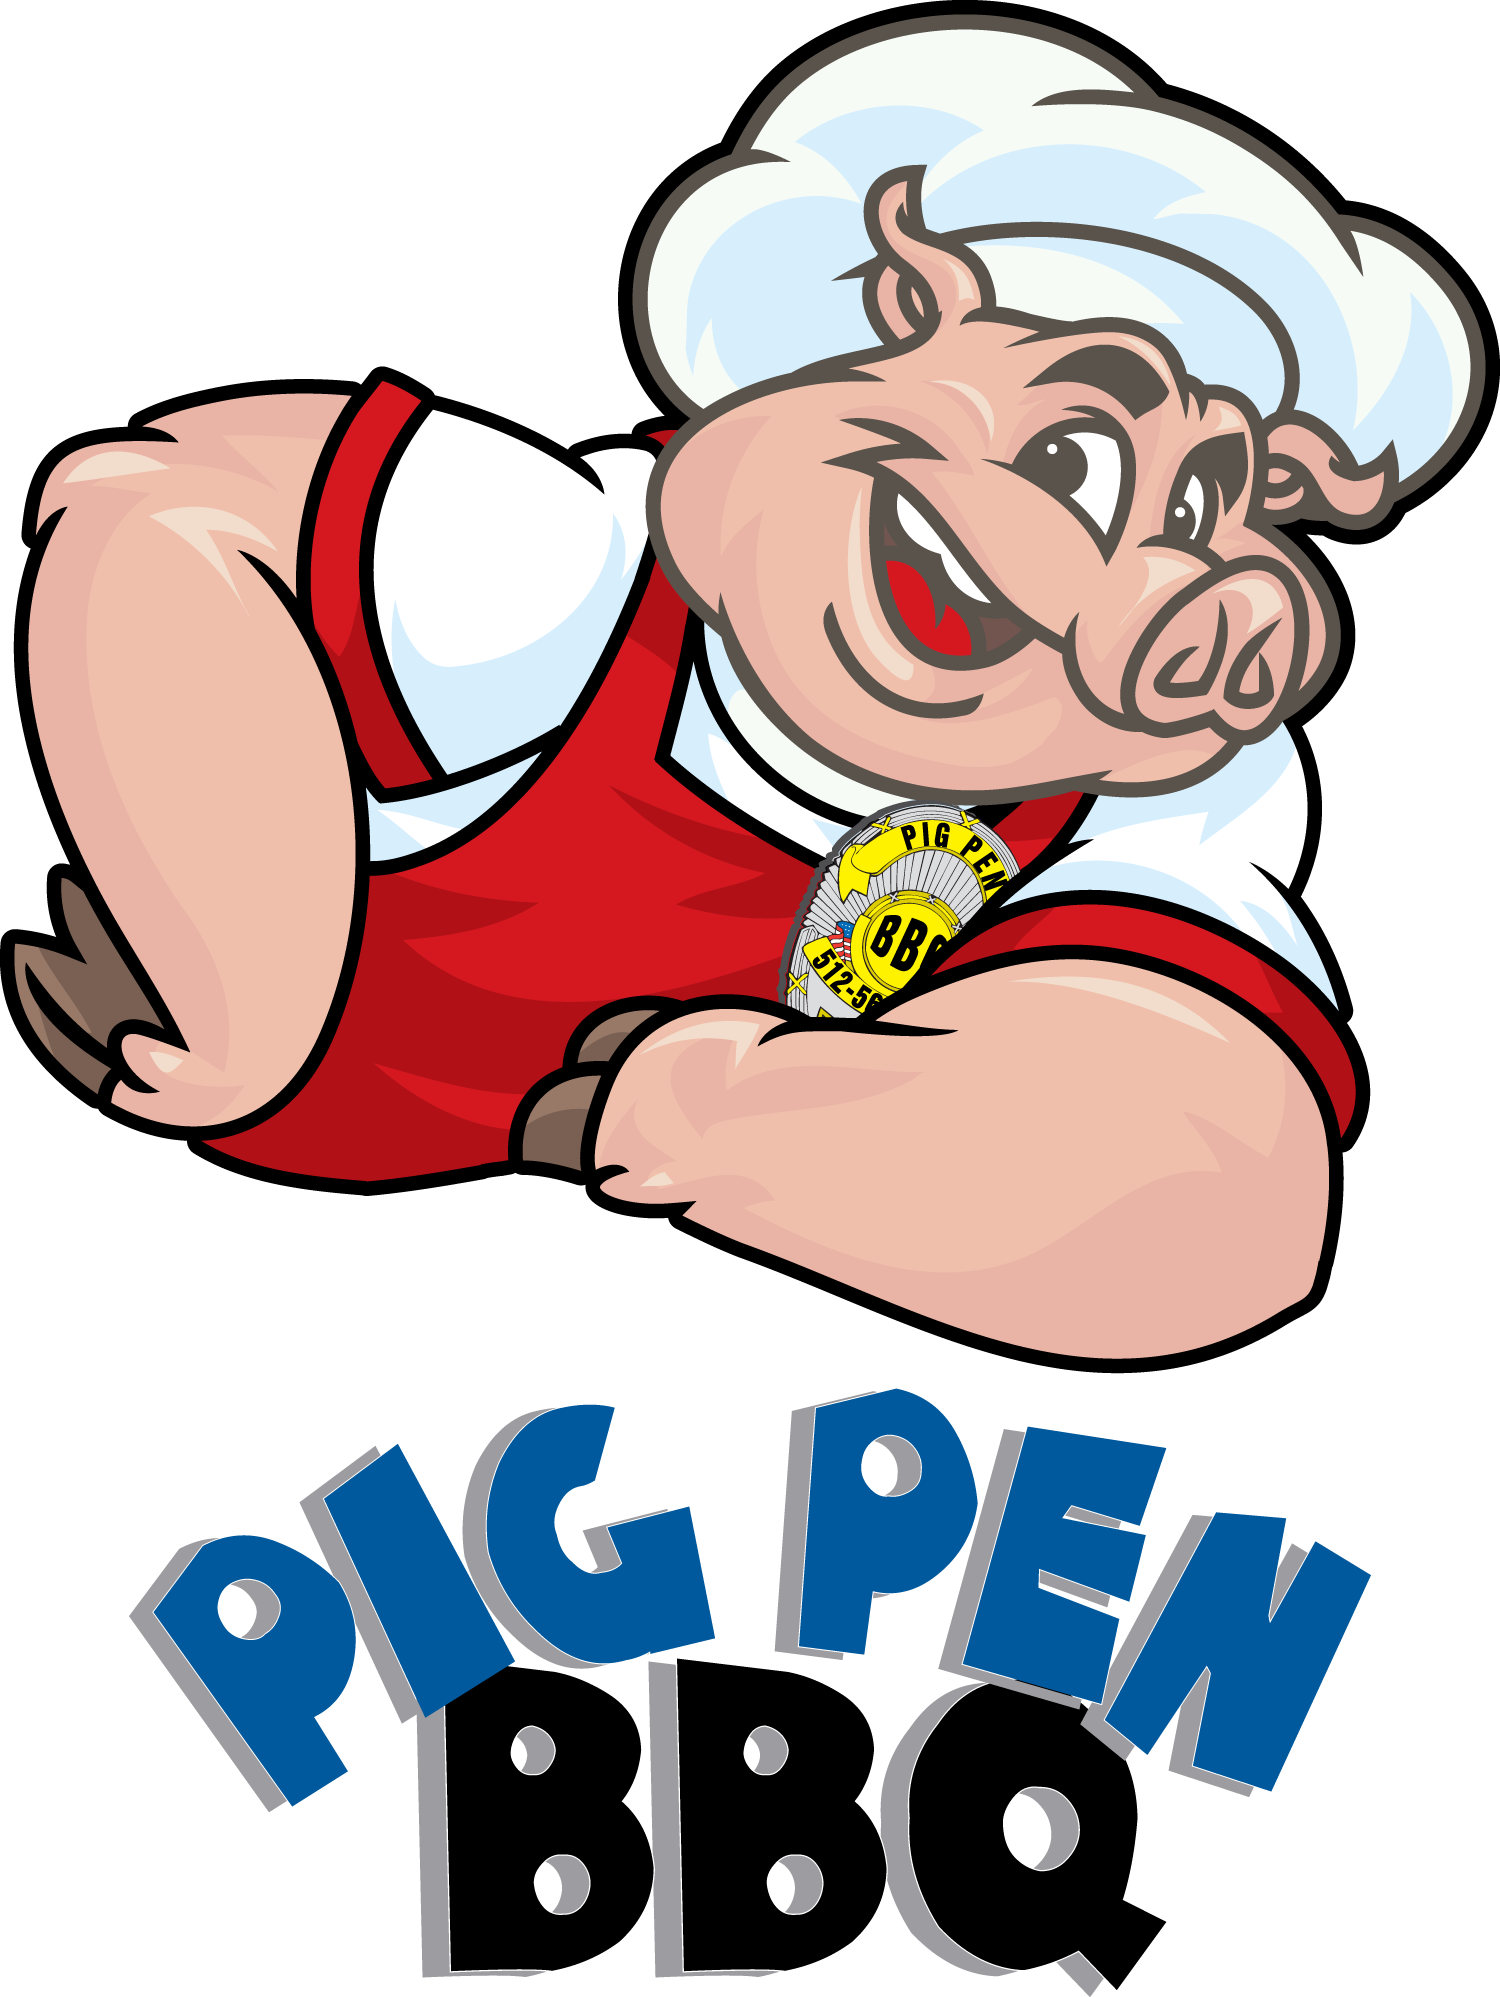 Barbecue Pig PNG - 158506